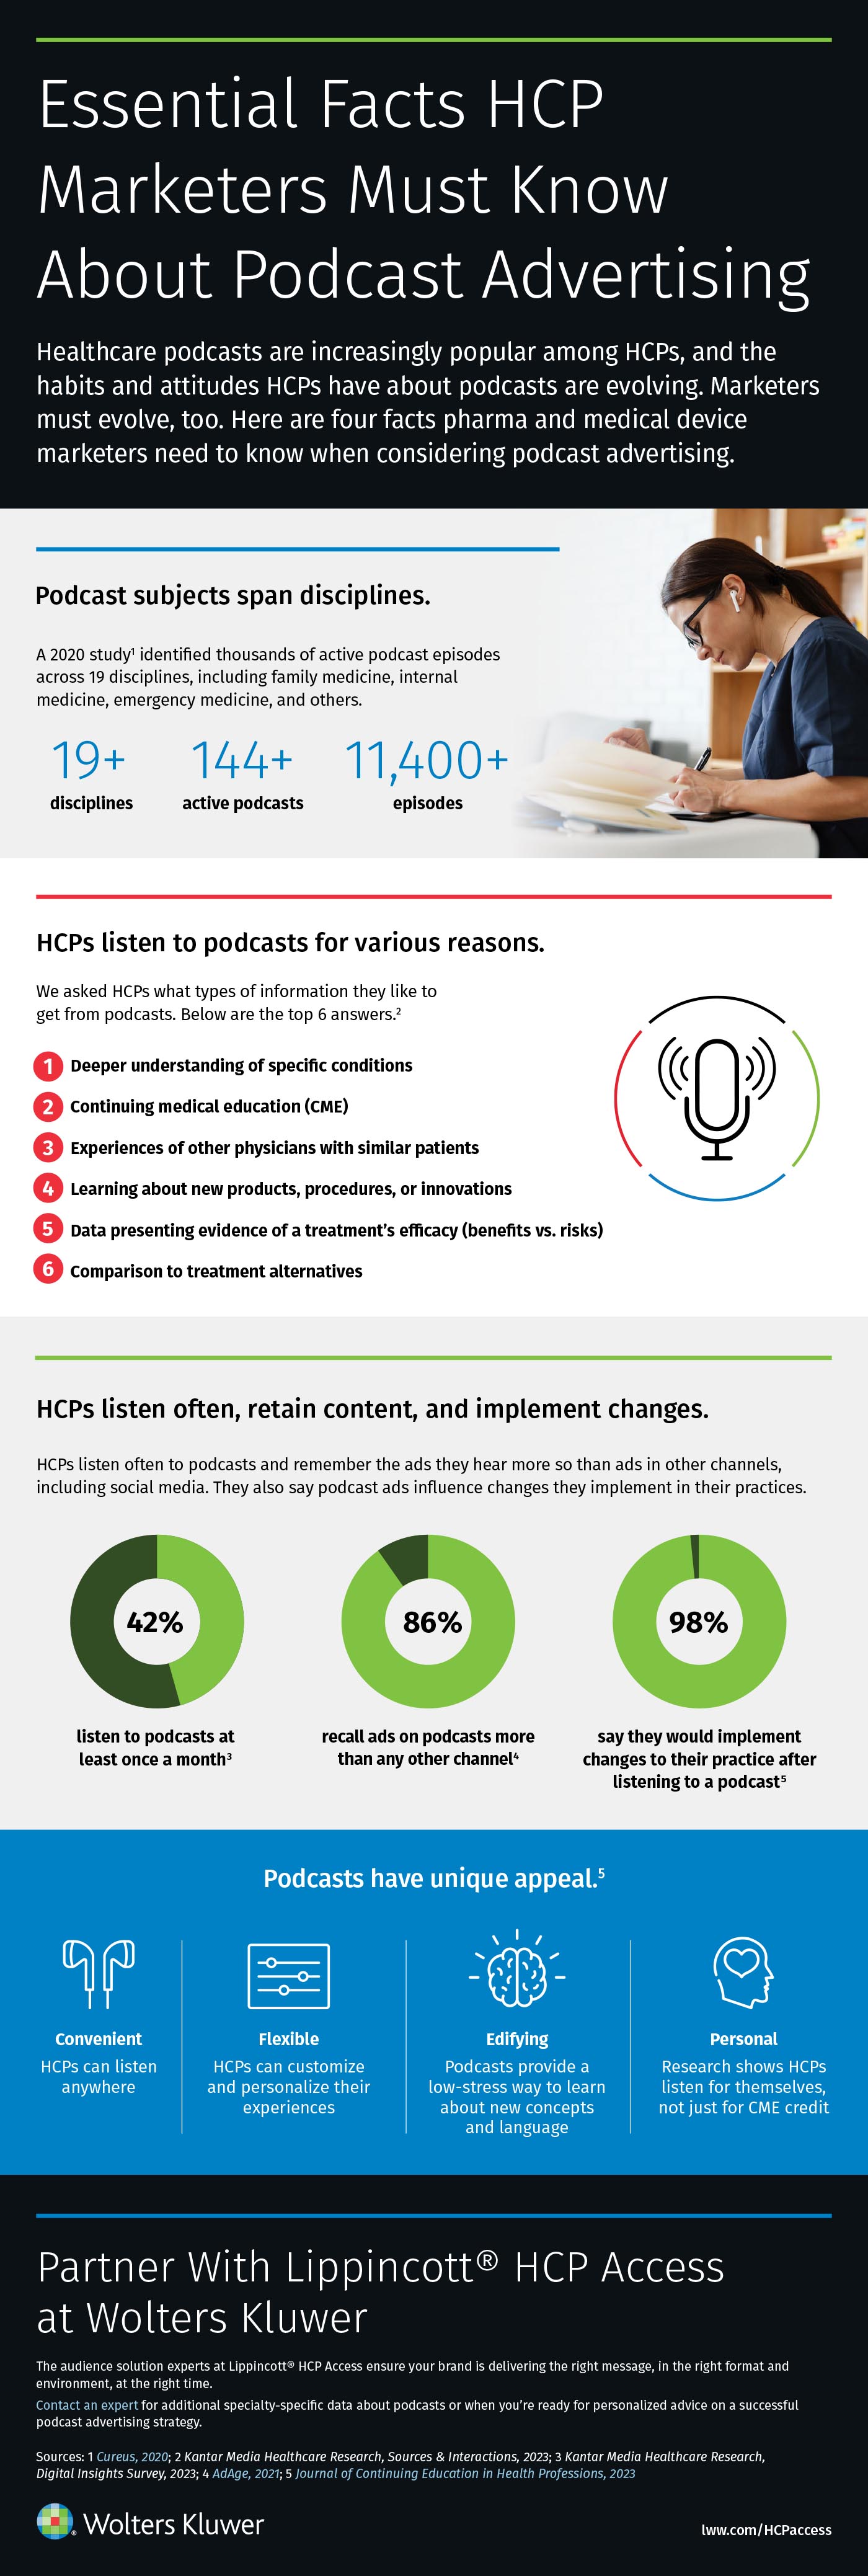 infographic-essential-facts-hcp-marketers-must-know-about-podcast-advertising.jpg